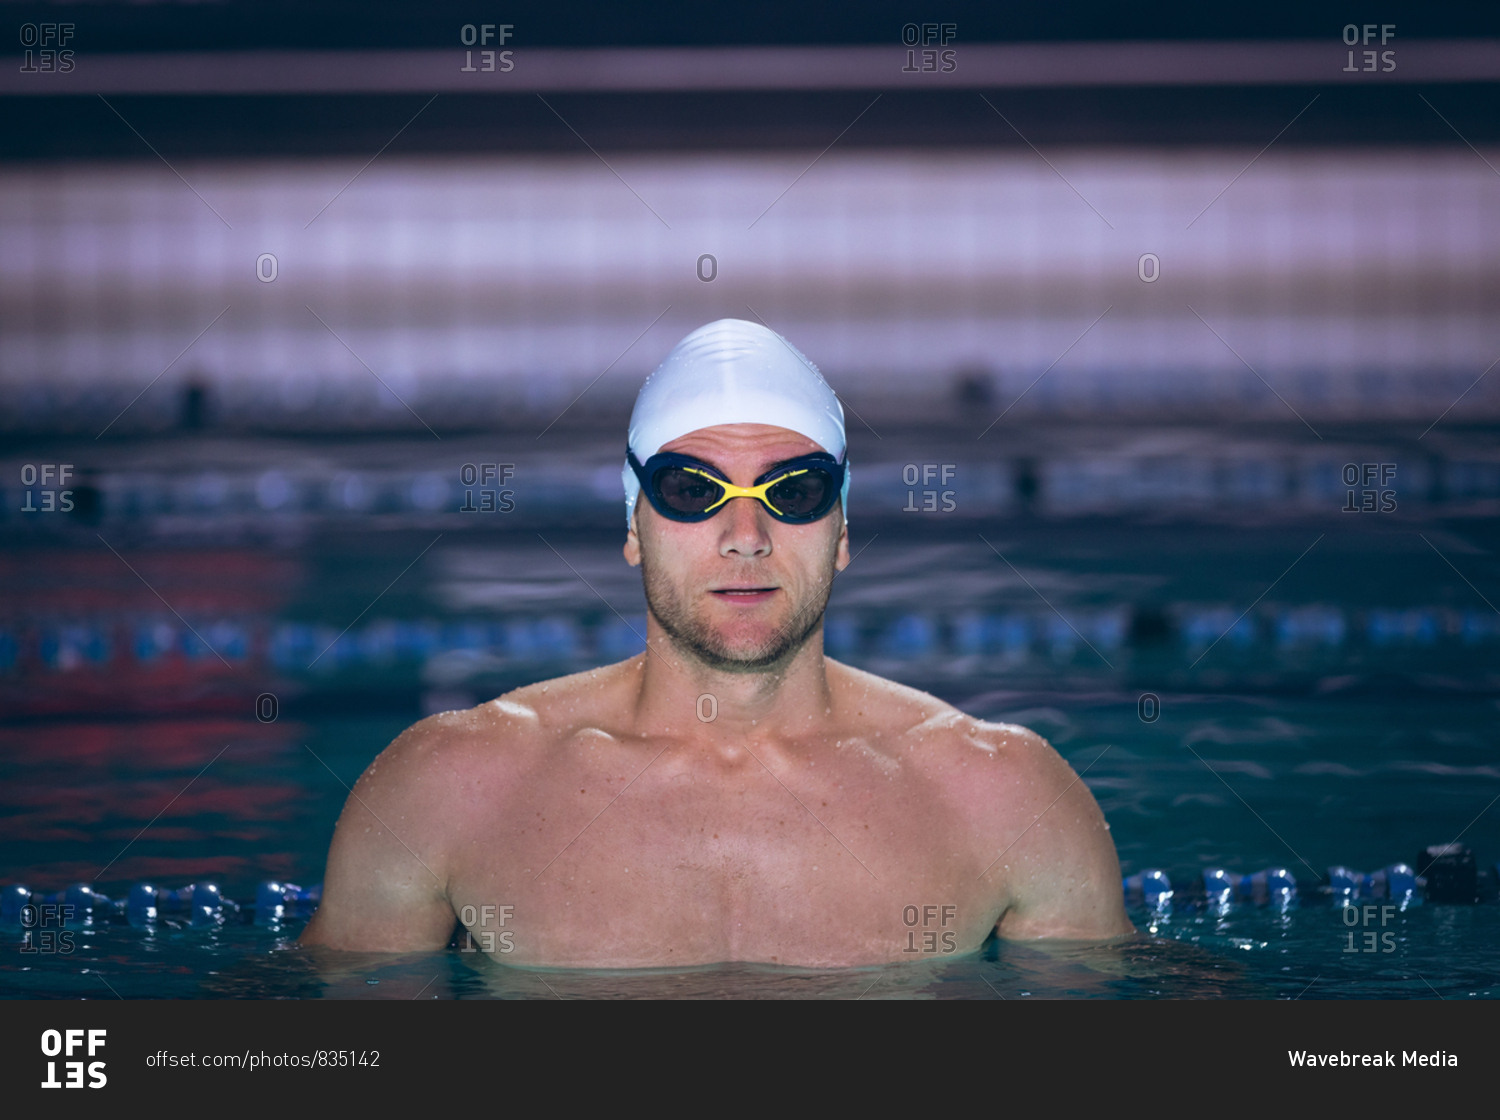 Front view of a male Caucasian swimmer wearing a white swimming cap and goggles while standing in the swimming pool